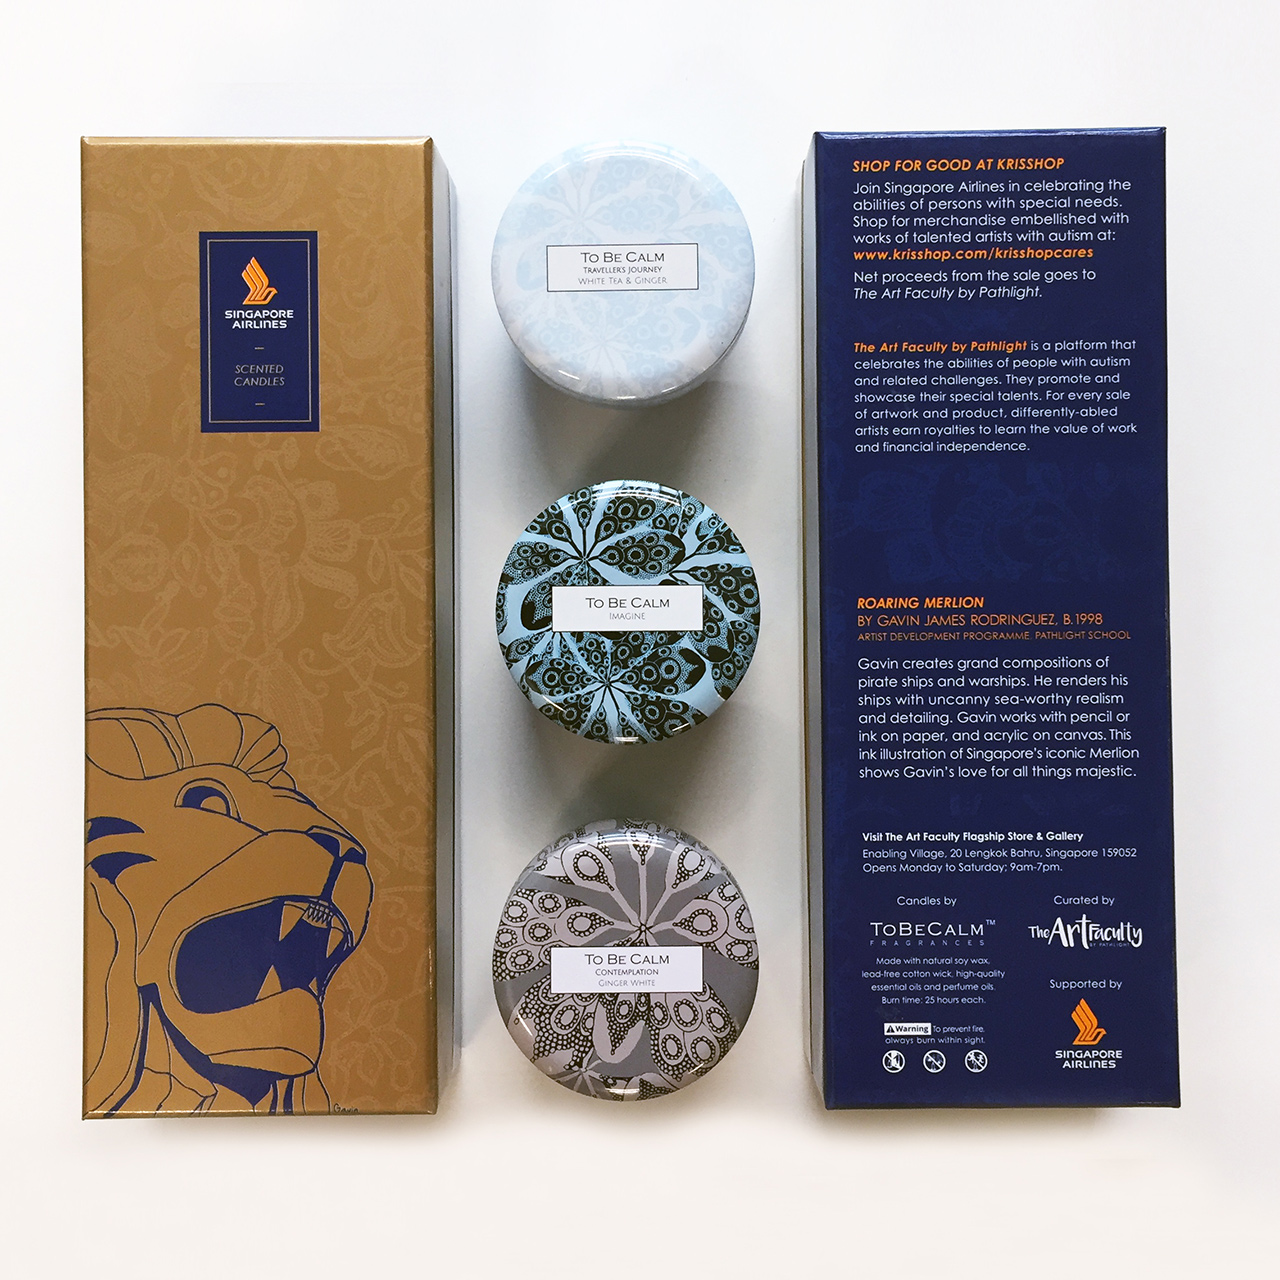 A scented candle box set with illustrations of the Merlion